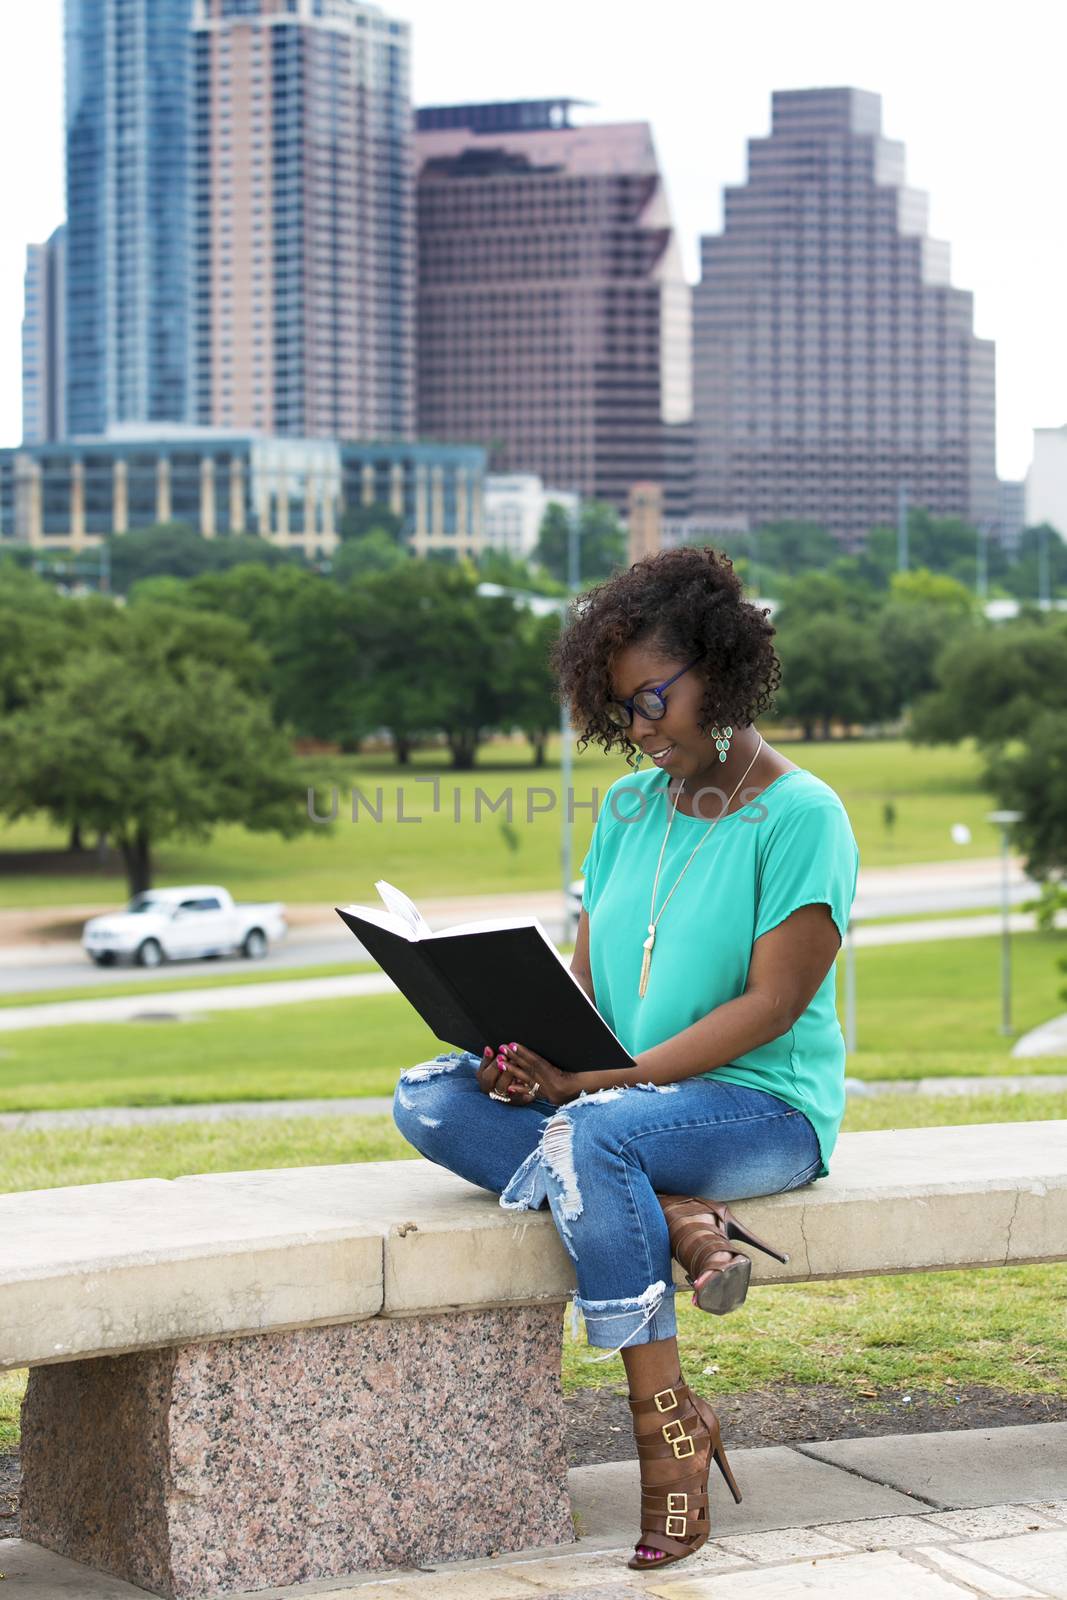 Reading in downtown park by GSPhotography